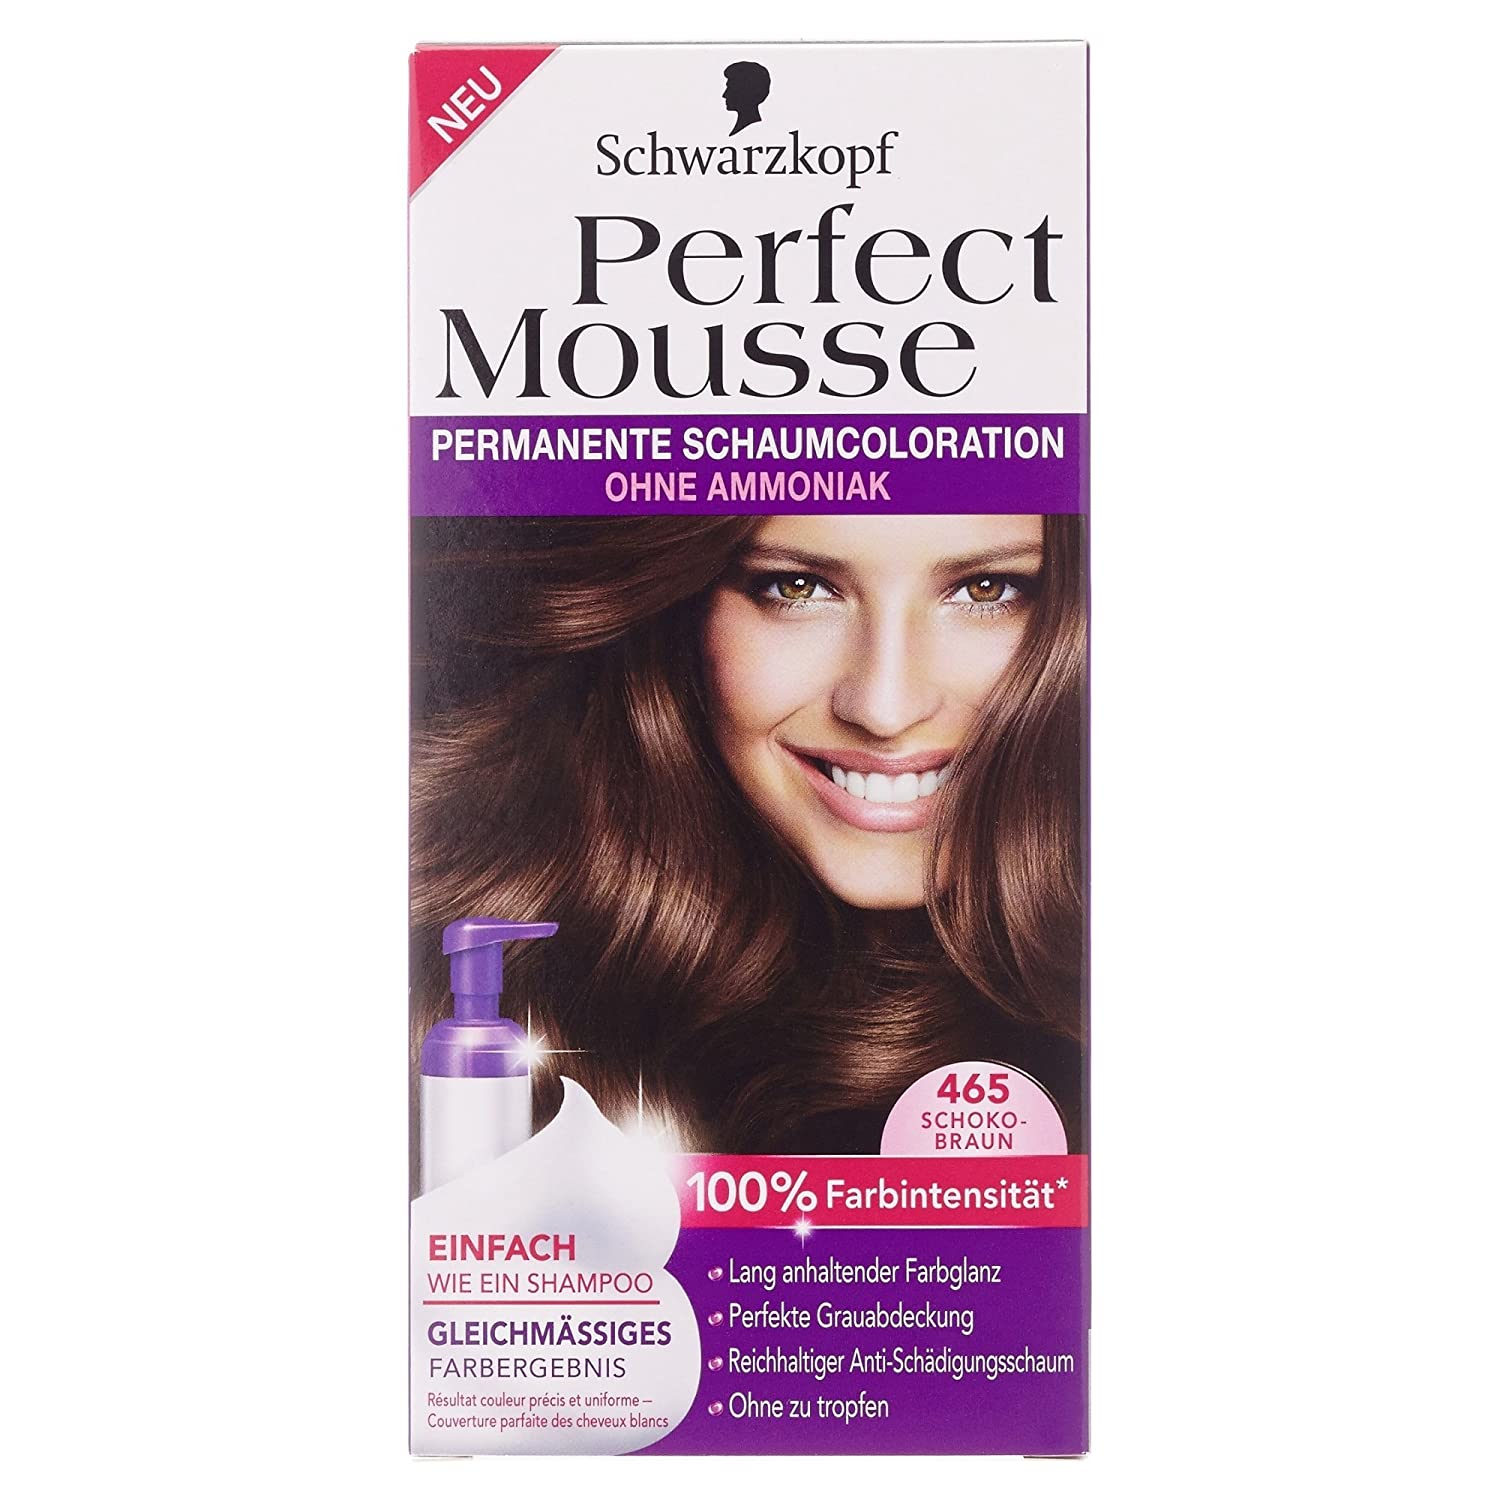 Schwarzkopf Perfect Mousse Permanent Color Level 3, 465 Chocolate Brown, ‎465